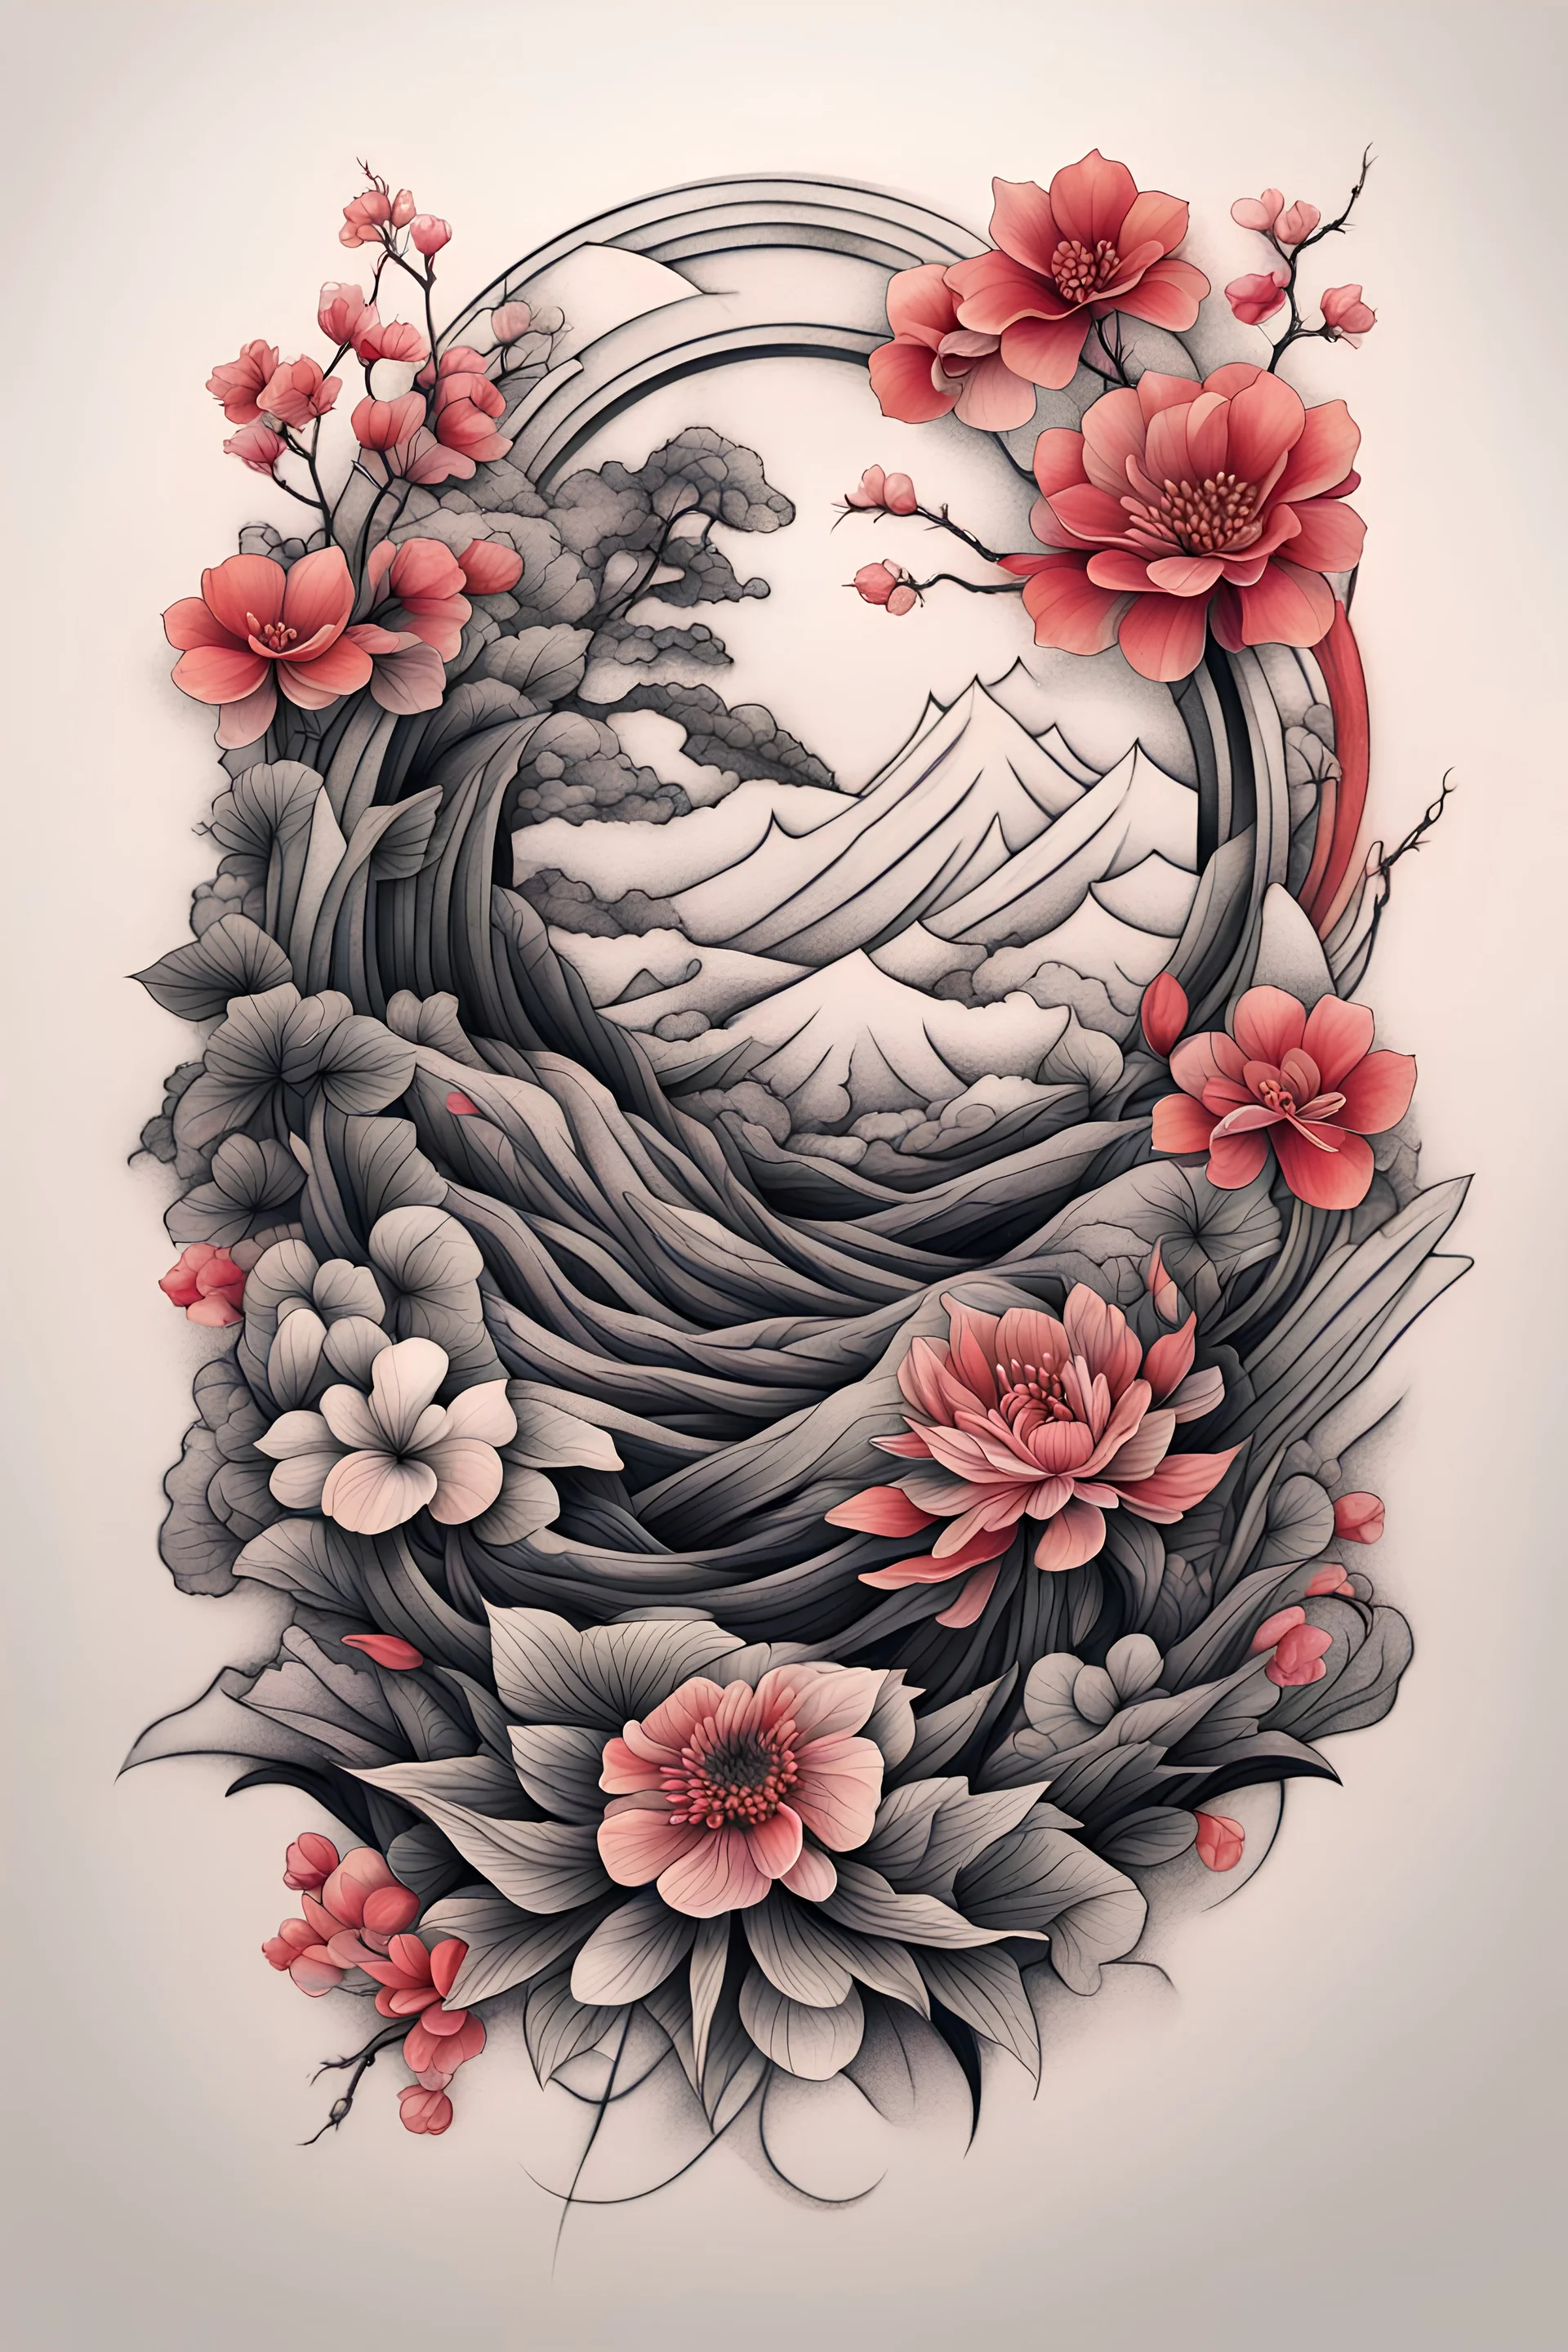 53 Stunning Koi Fish Tattoos With Meaning - Our Mindful Life